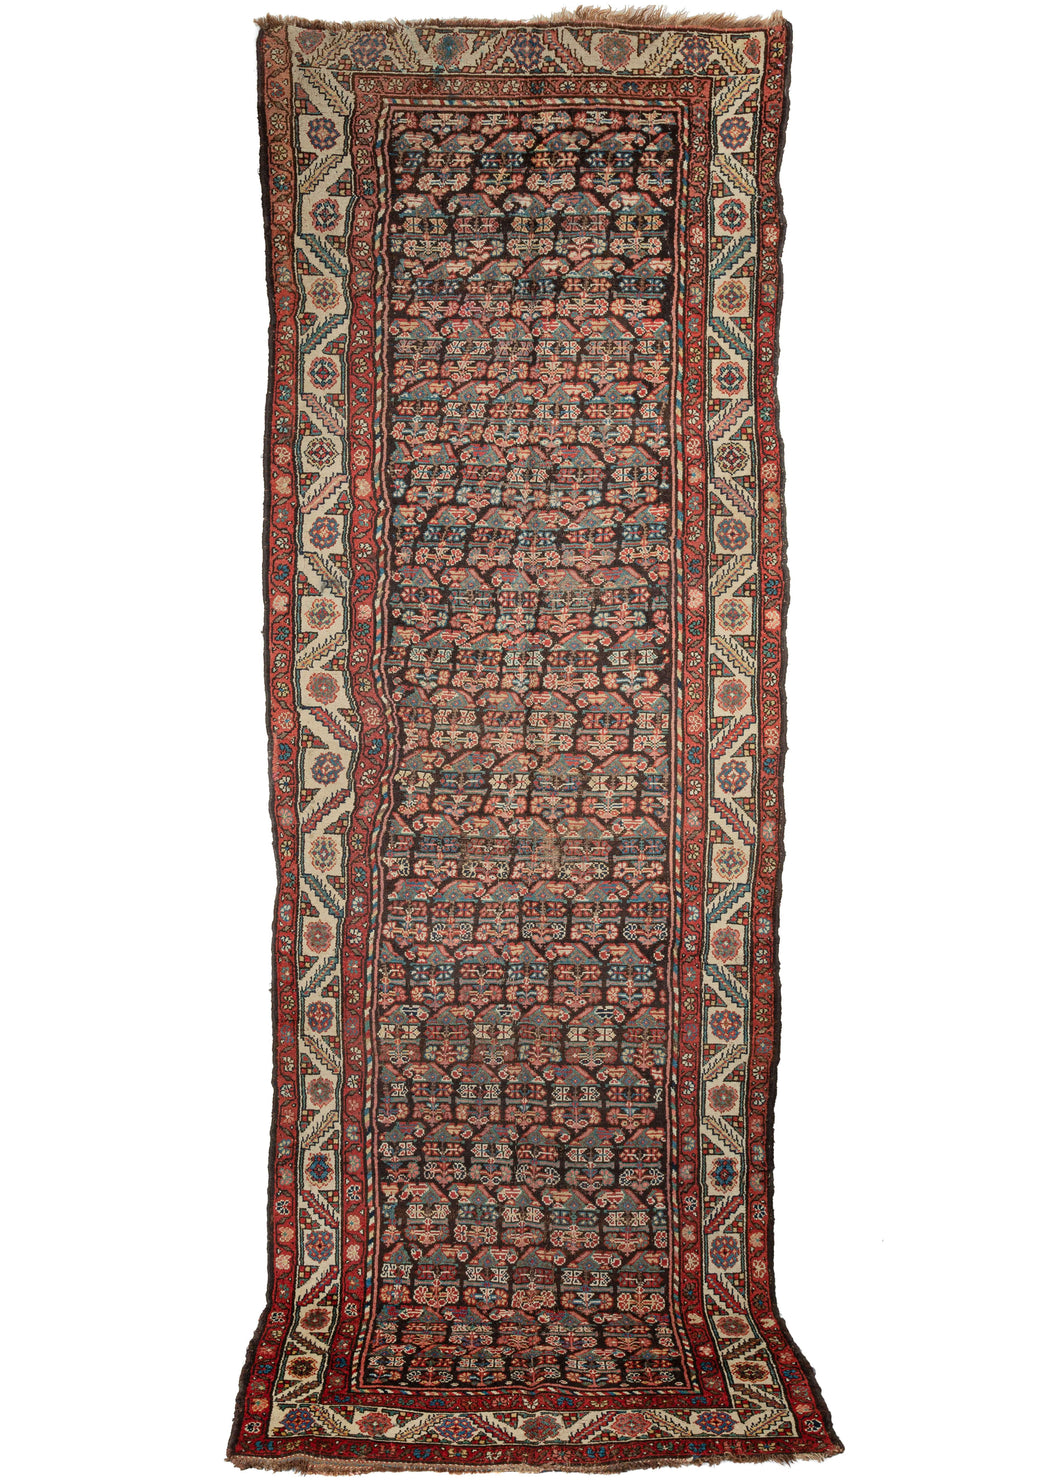 Antique NW Persian Kurdish runner composed of rows of floral boteh on a deep brown ground. The main border features rosettes and jagged leaves on an ivory ground, while the minor borders contain a delicate floral meander. Note the multicolor candy-cane border around the field, which also emphasizes the eccentricity and the wonkiness of the weave itself. 